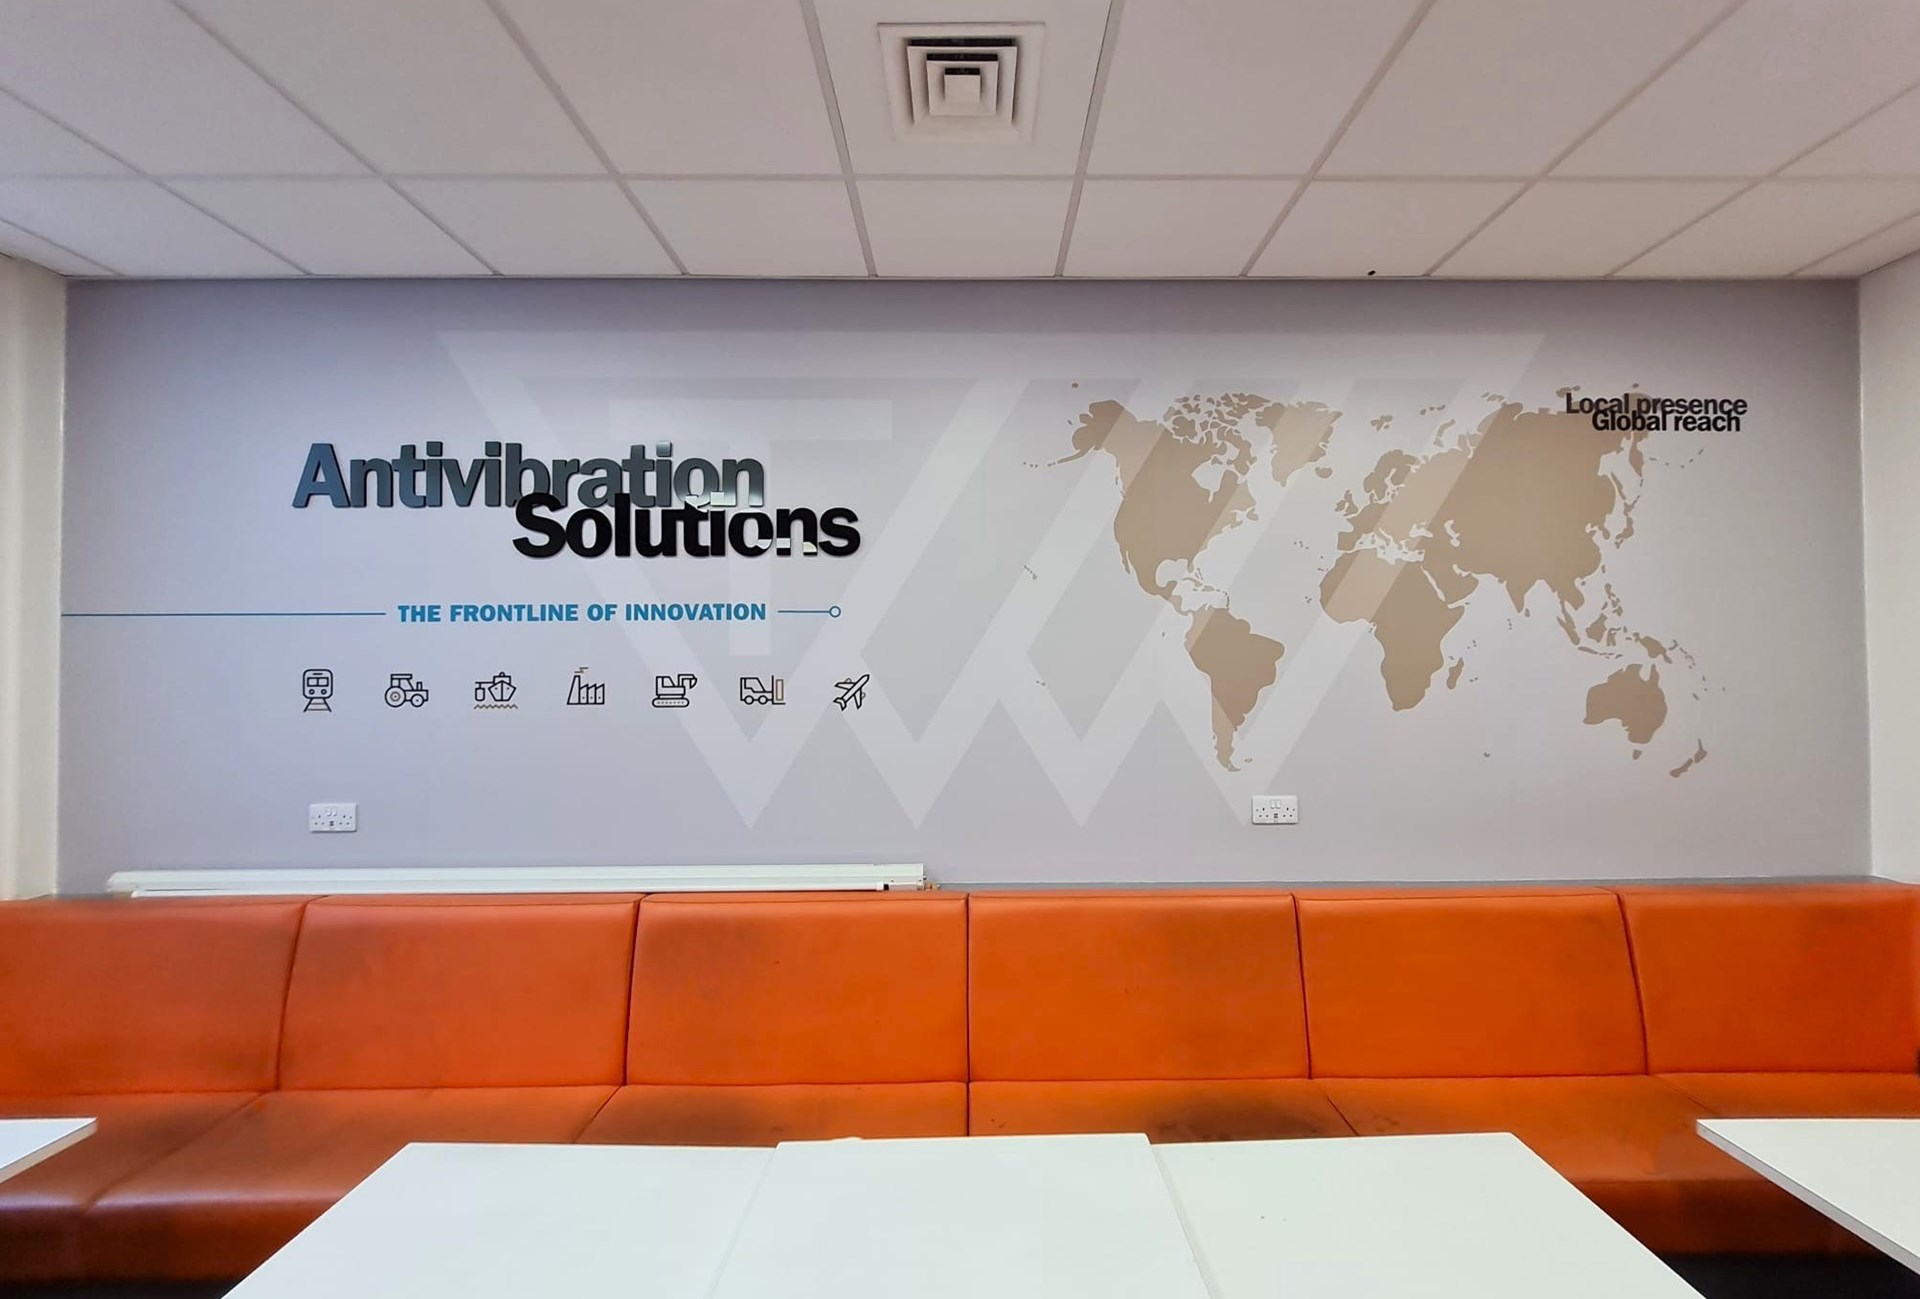 Digitally Printed Wall Graphics With Acrylic Letters To Face Trelleborg Signs Express Leicester